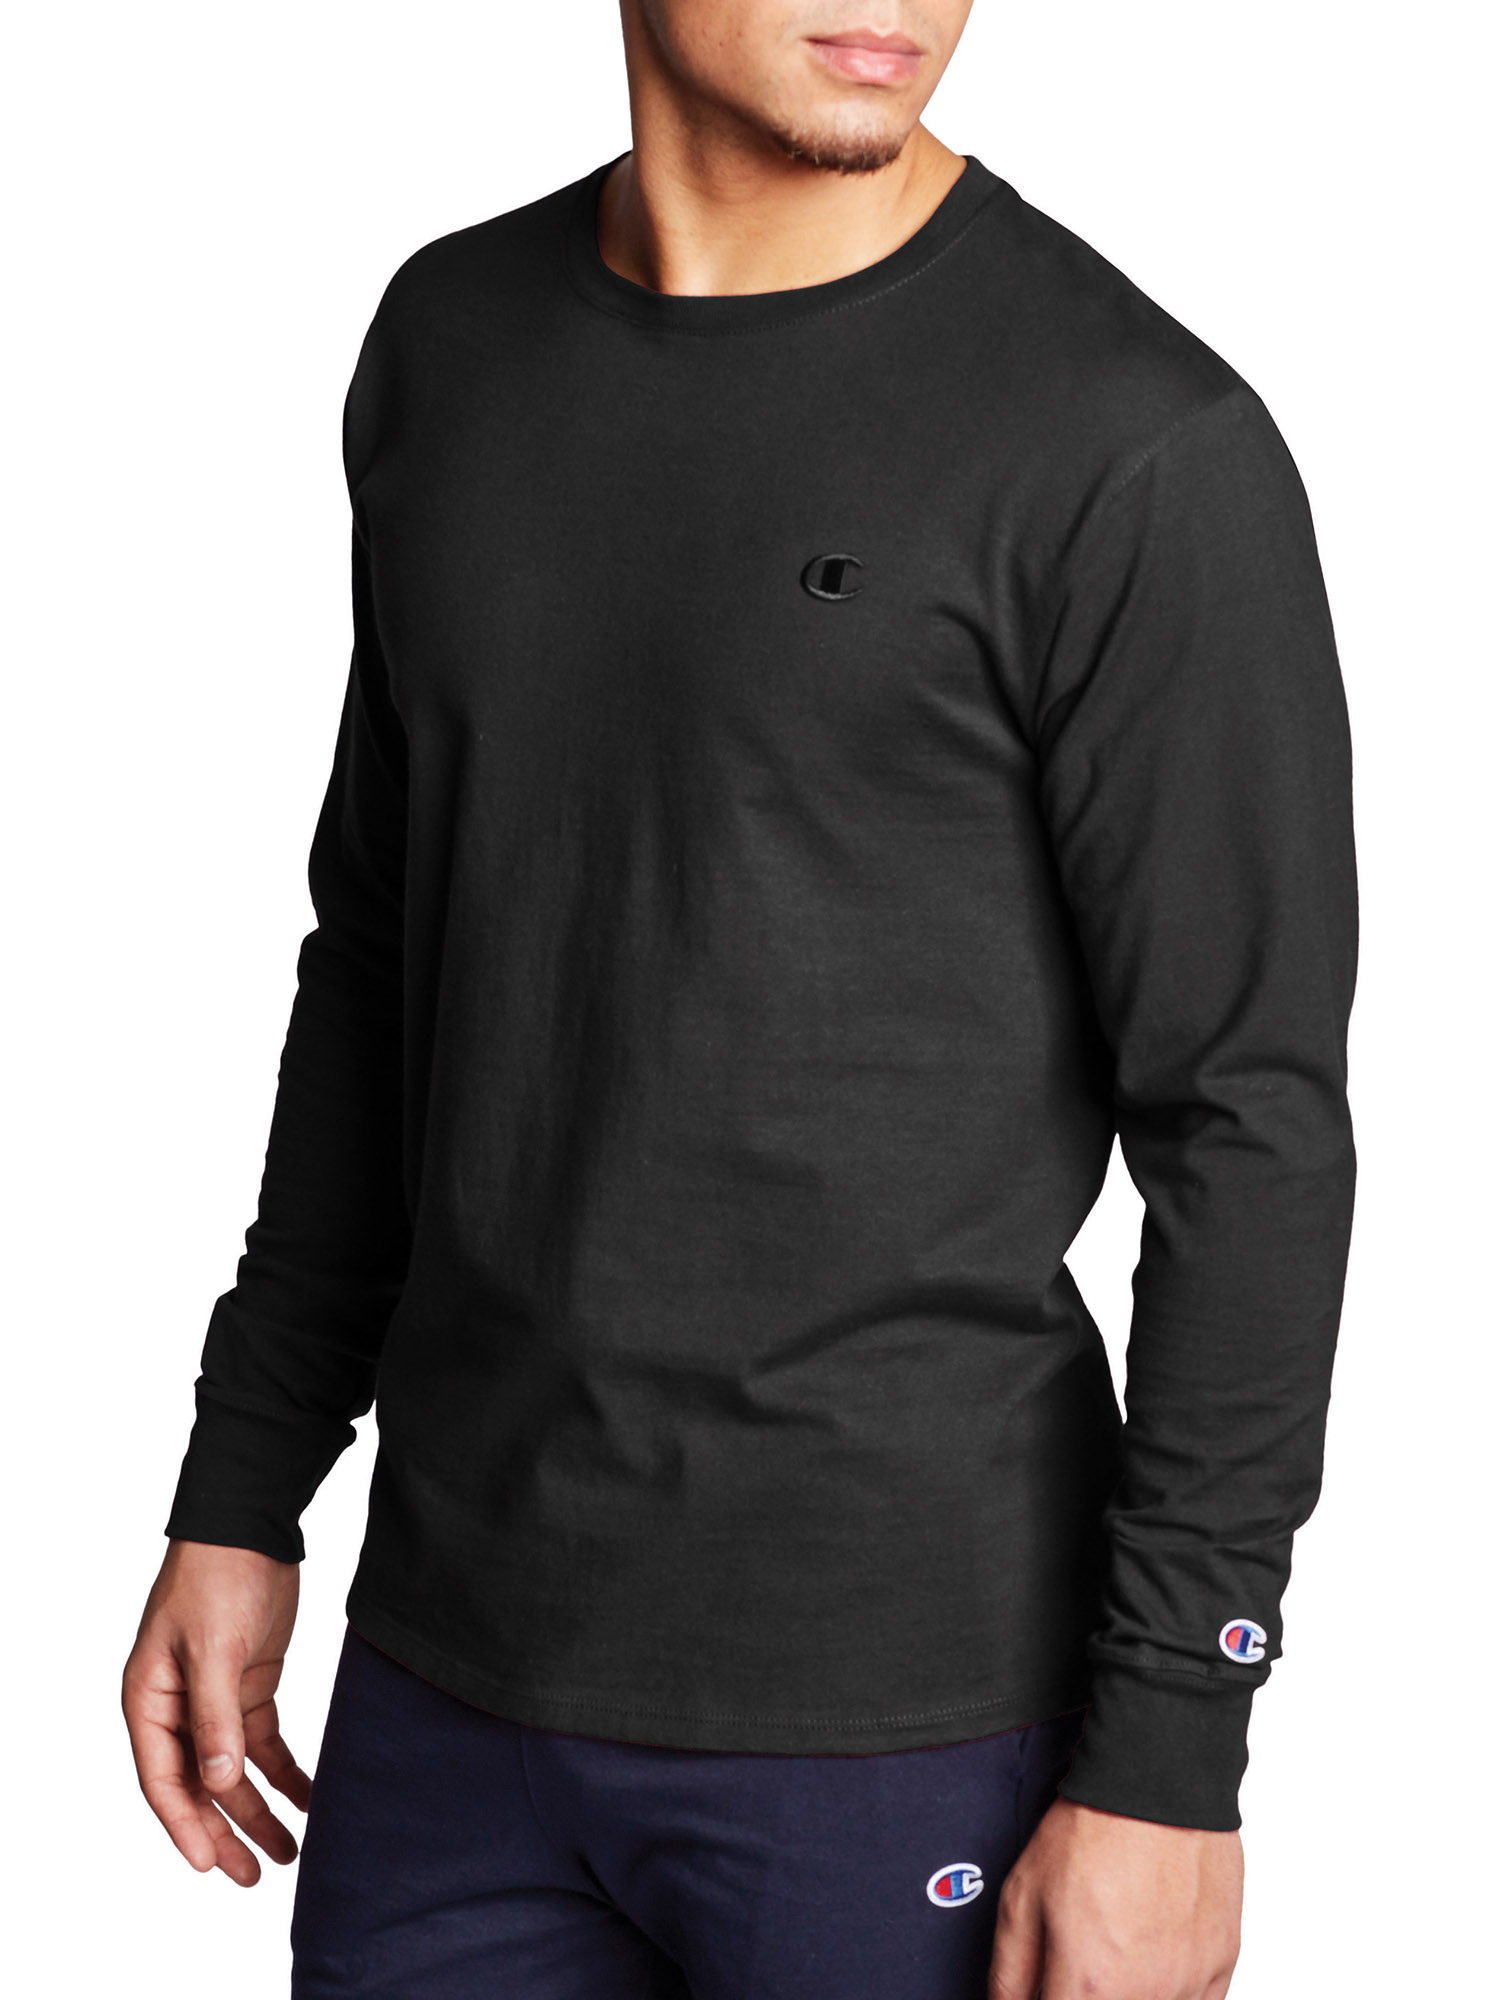 Champion Men's and Big Men's Classic Solid Jersey Long Sleeve T-Shirt, Sizes S-2XL - image 1 of 7